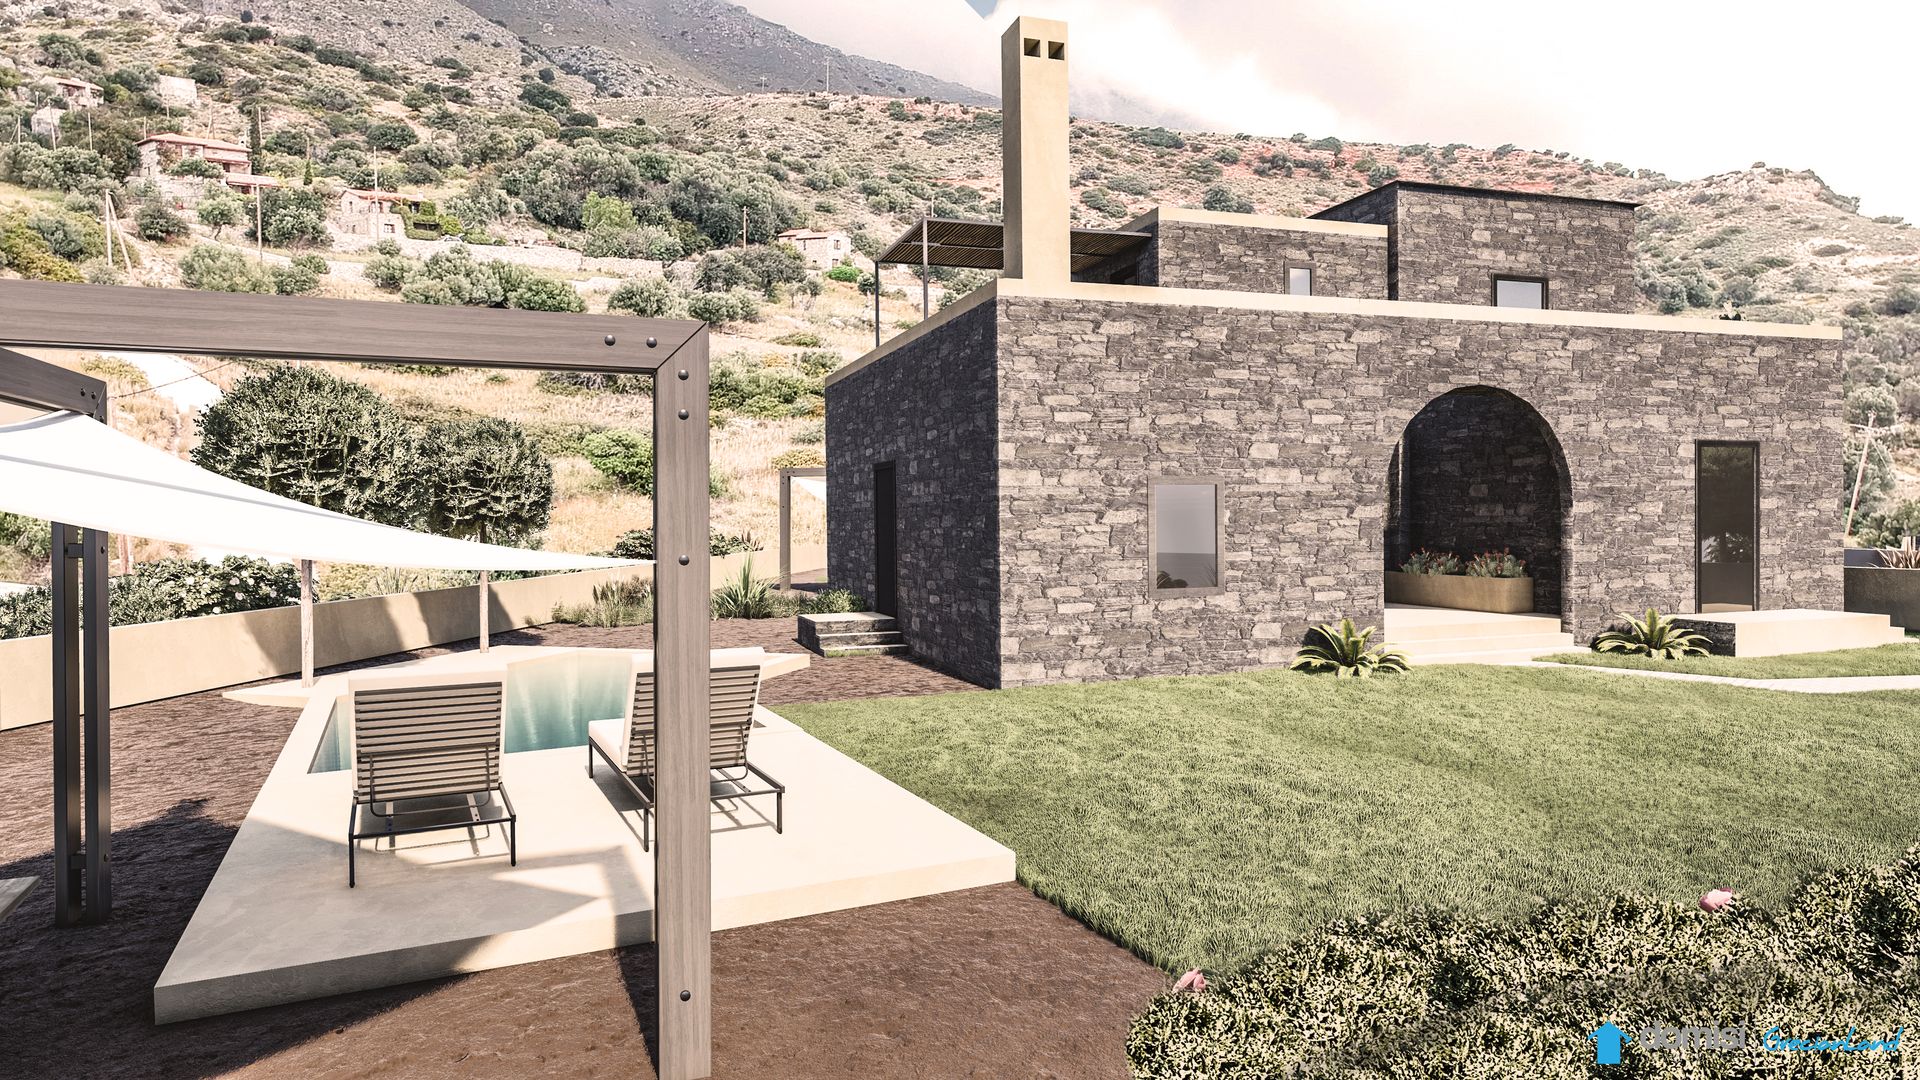 Stonebuilt villa , is going to be built.